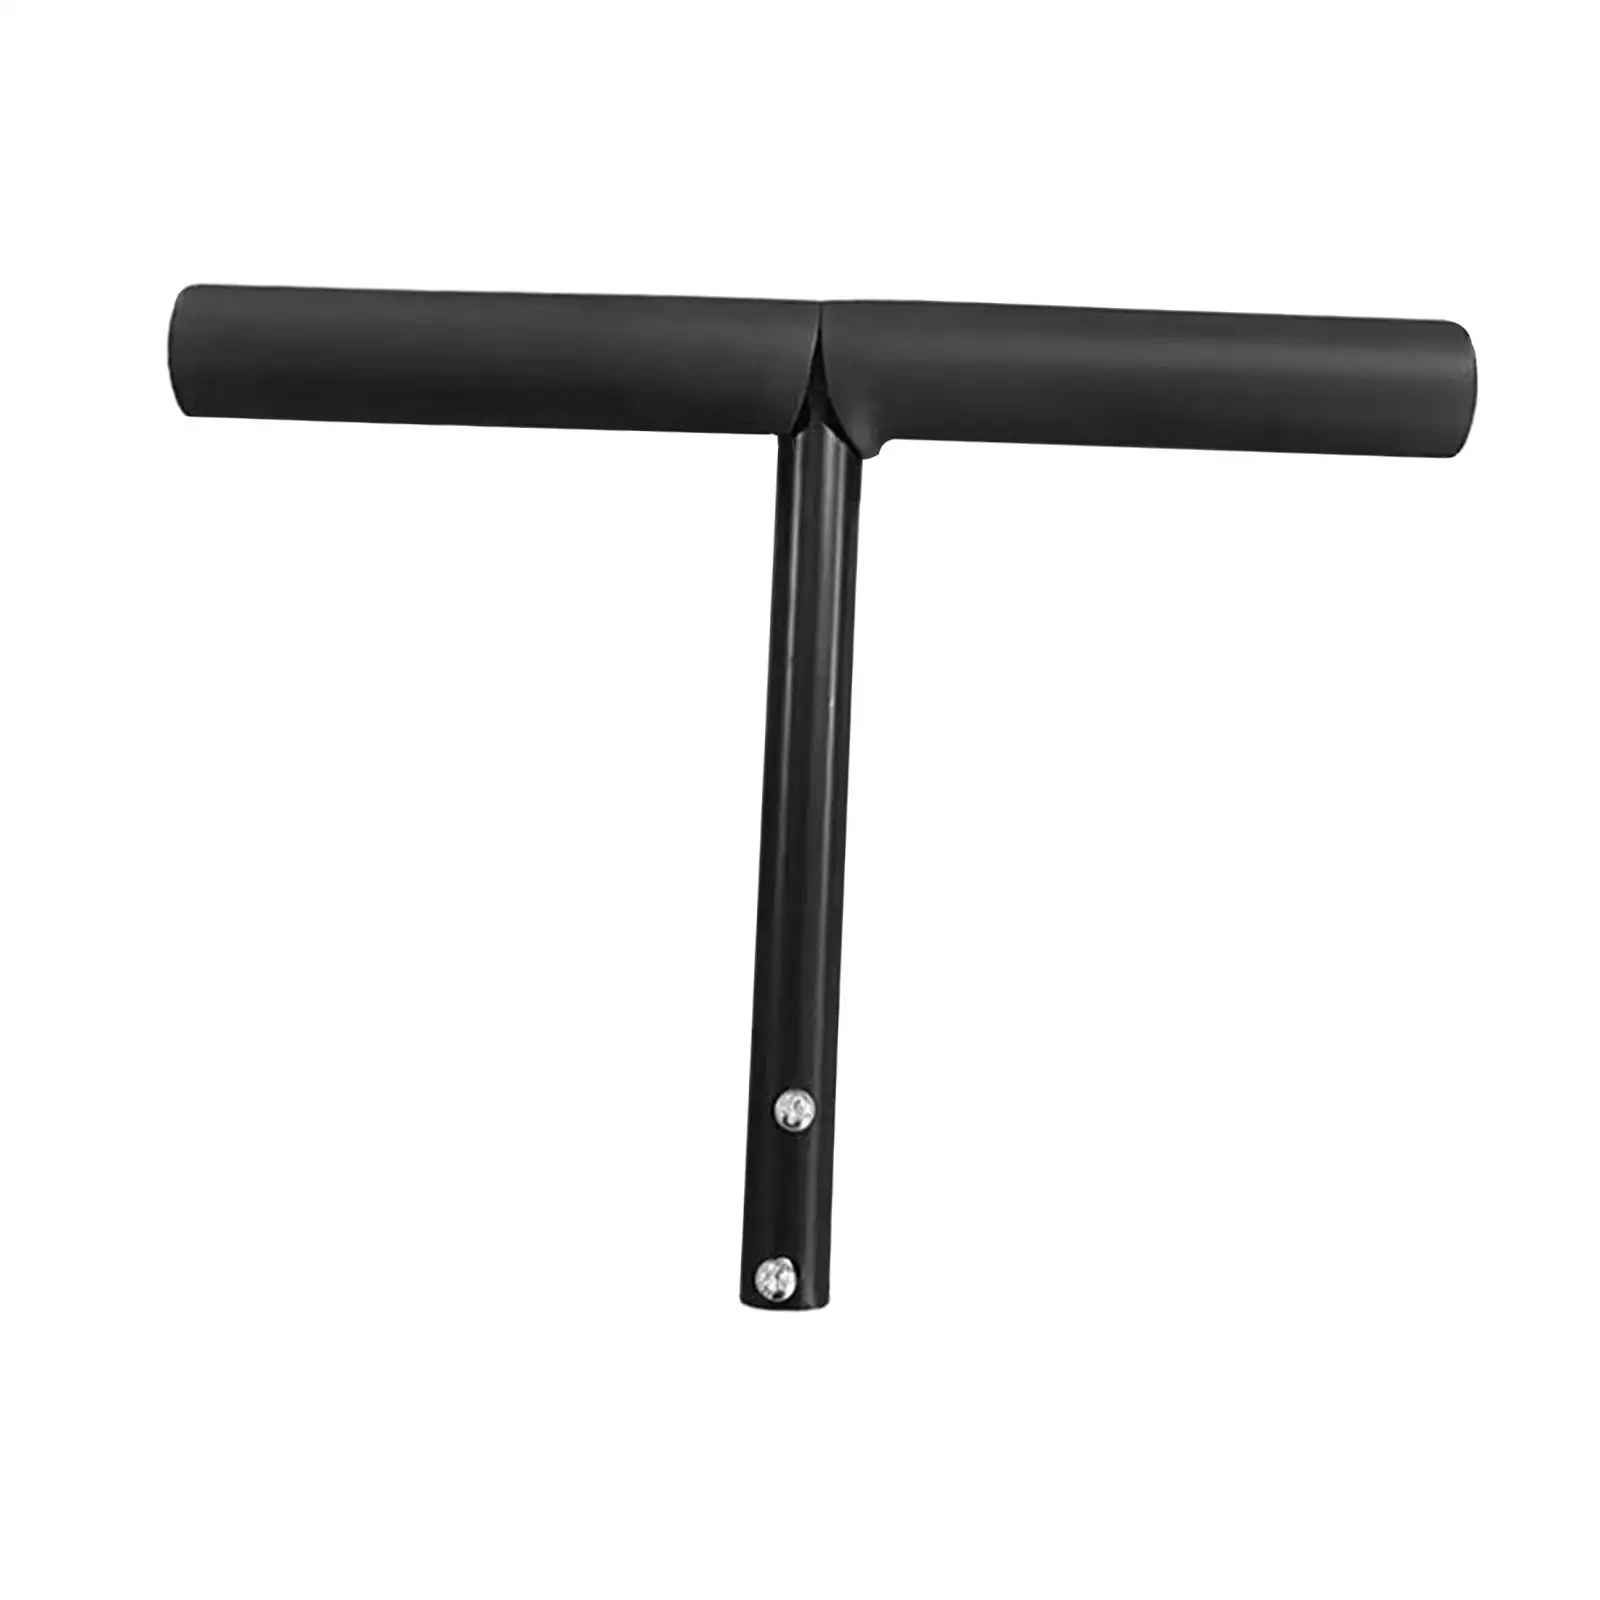 T Shaped Push Handle Bar Sturdy Easy to Install for Travel Home